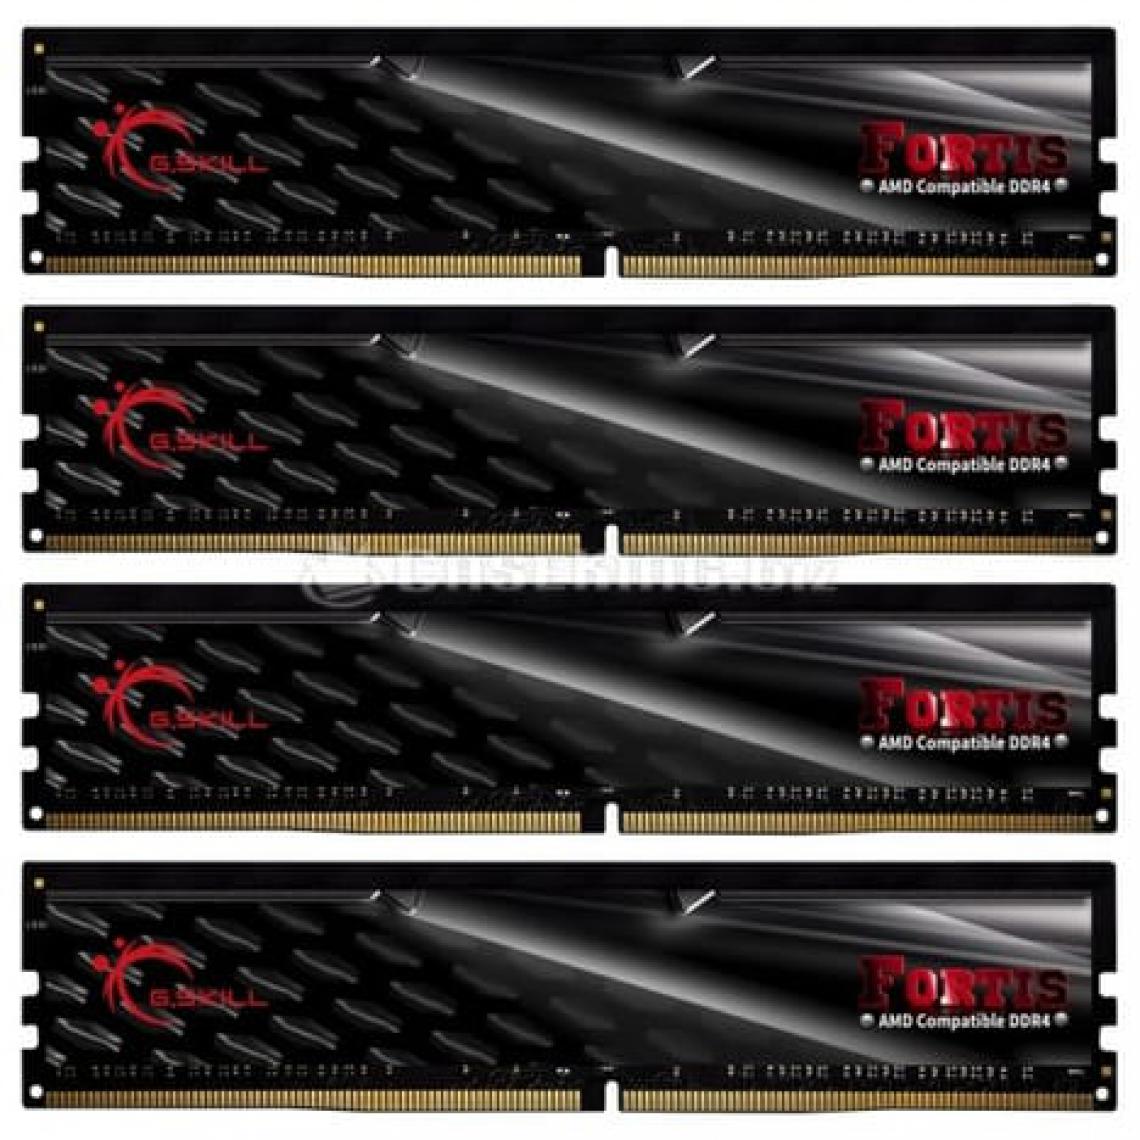 Gskill - Fortis Series 64 Go (4x 16 Go) DDR4 2400 MHz CL15 - RAM PC Fixe